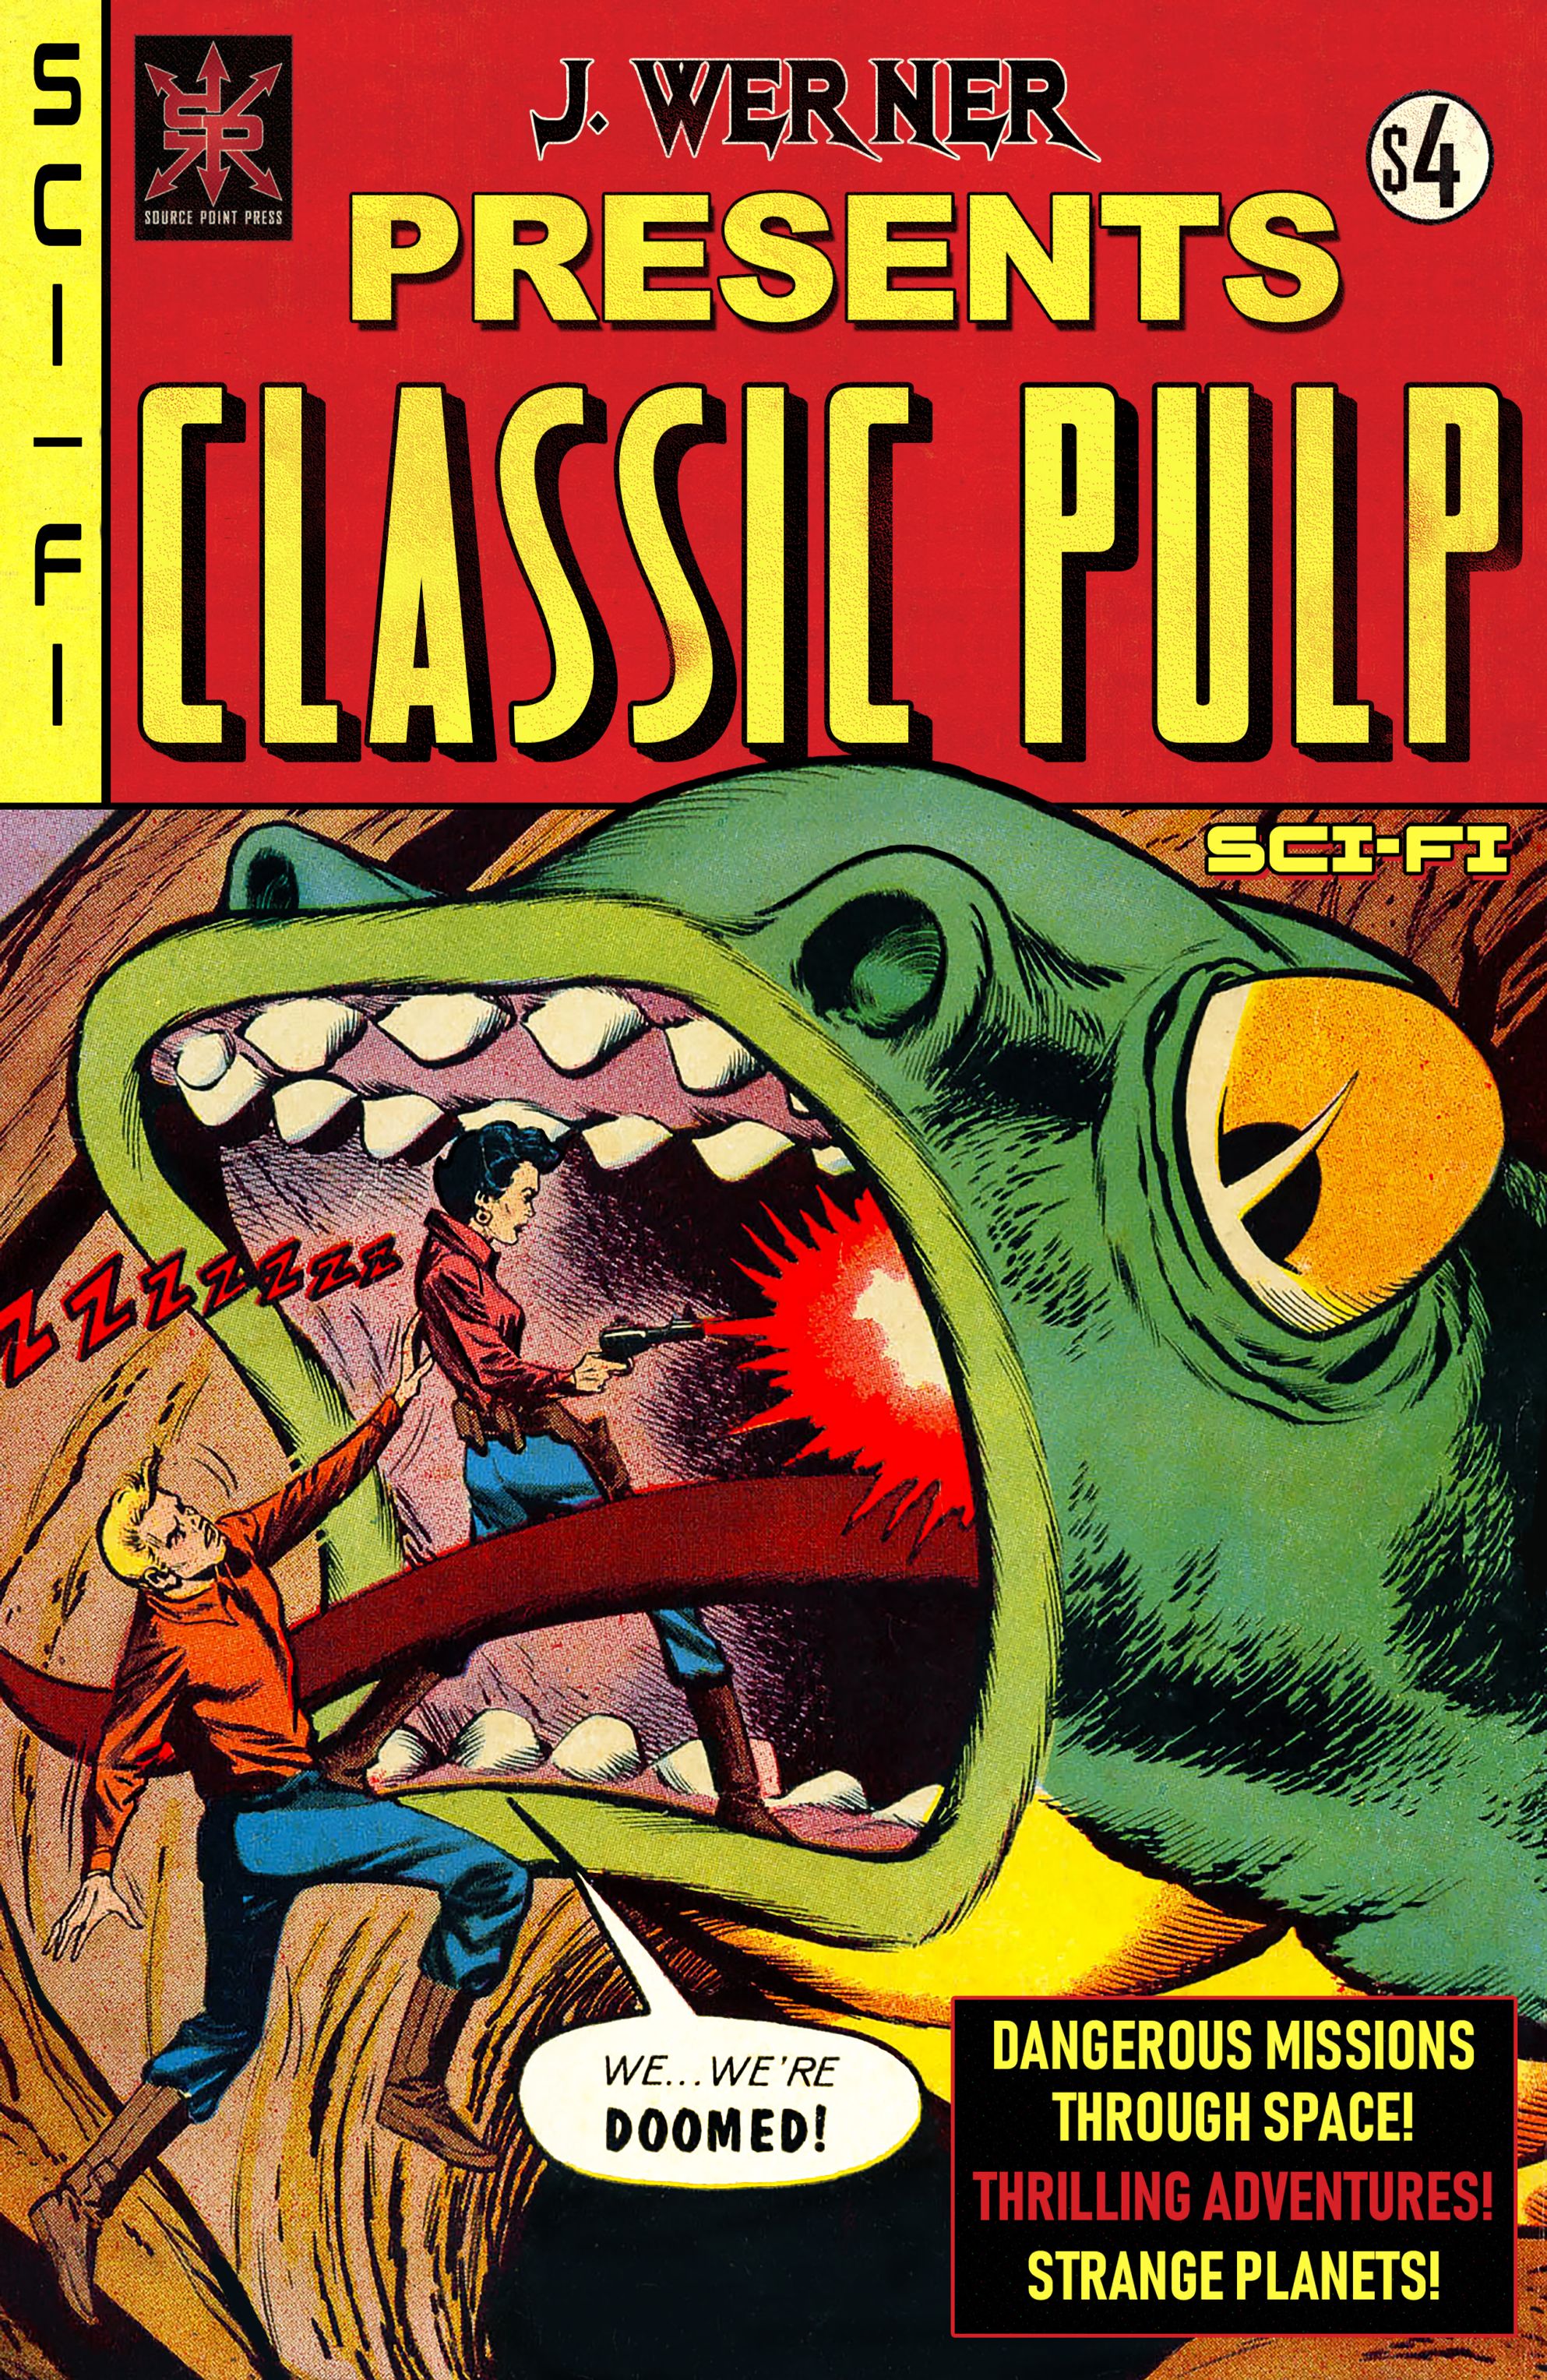 Read online J. Werner presents Classic Pulp comic -  Issue # Sci-Fi - 1